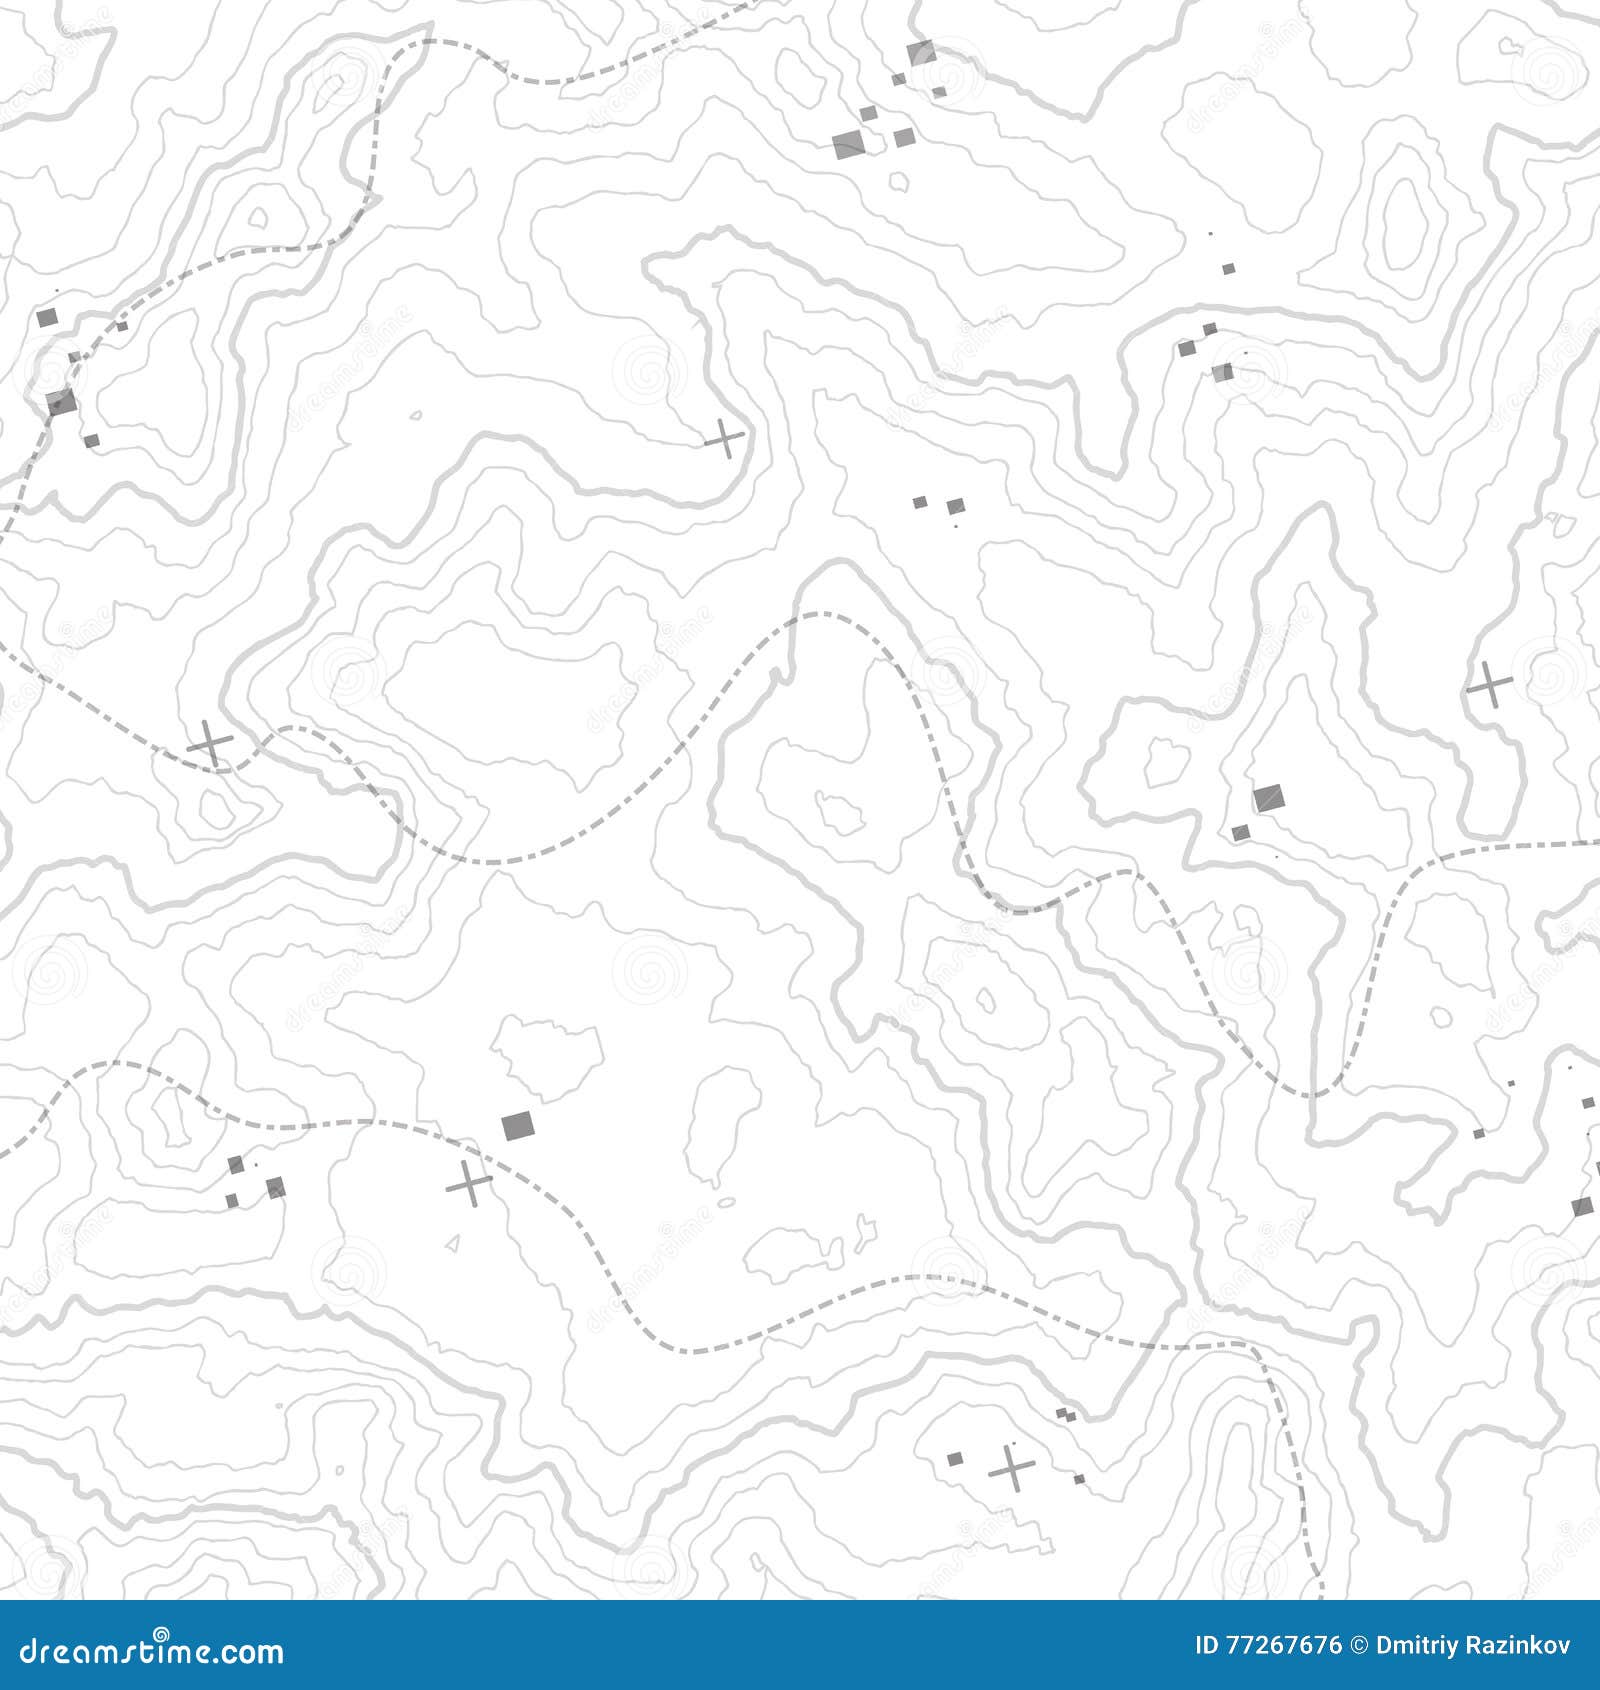 topographic map background concept with space for your copy. topography lines art contour , mountain hiking trail